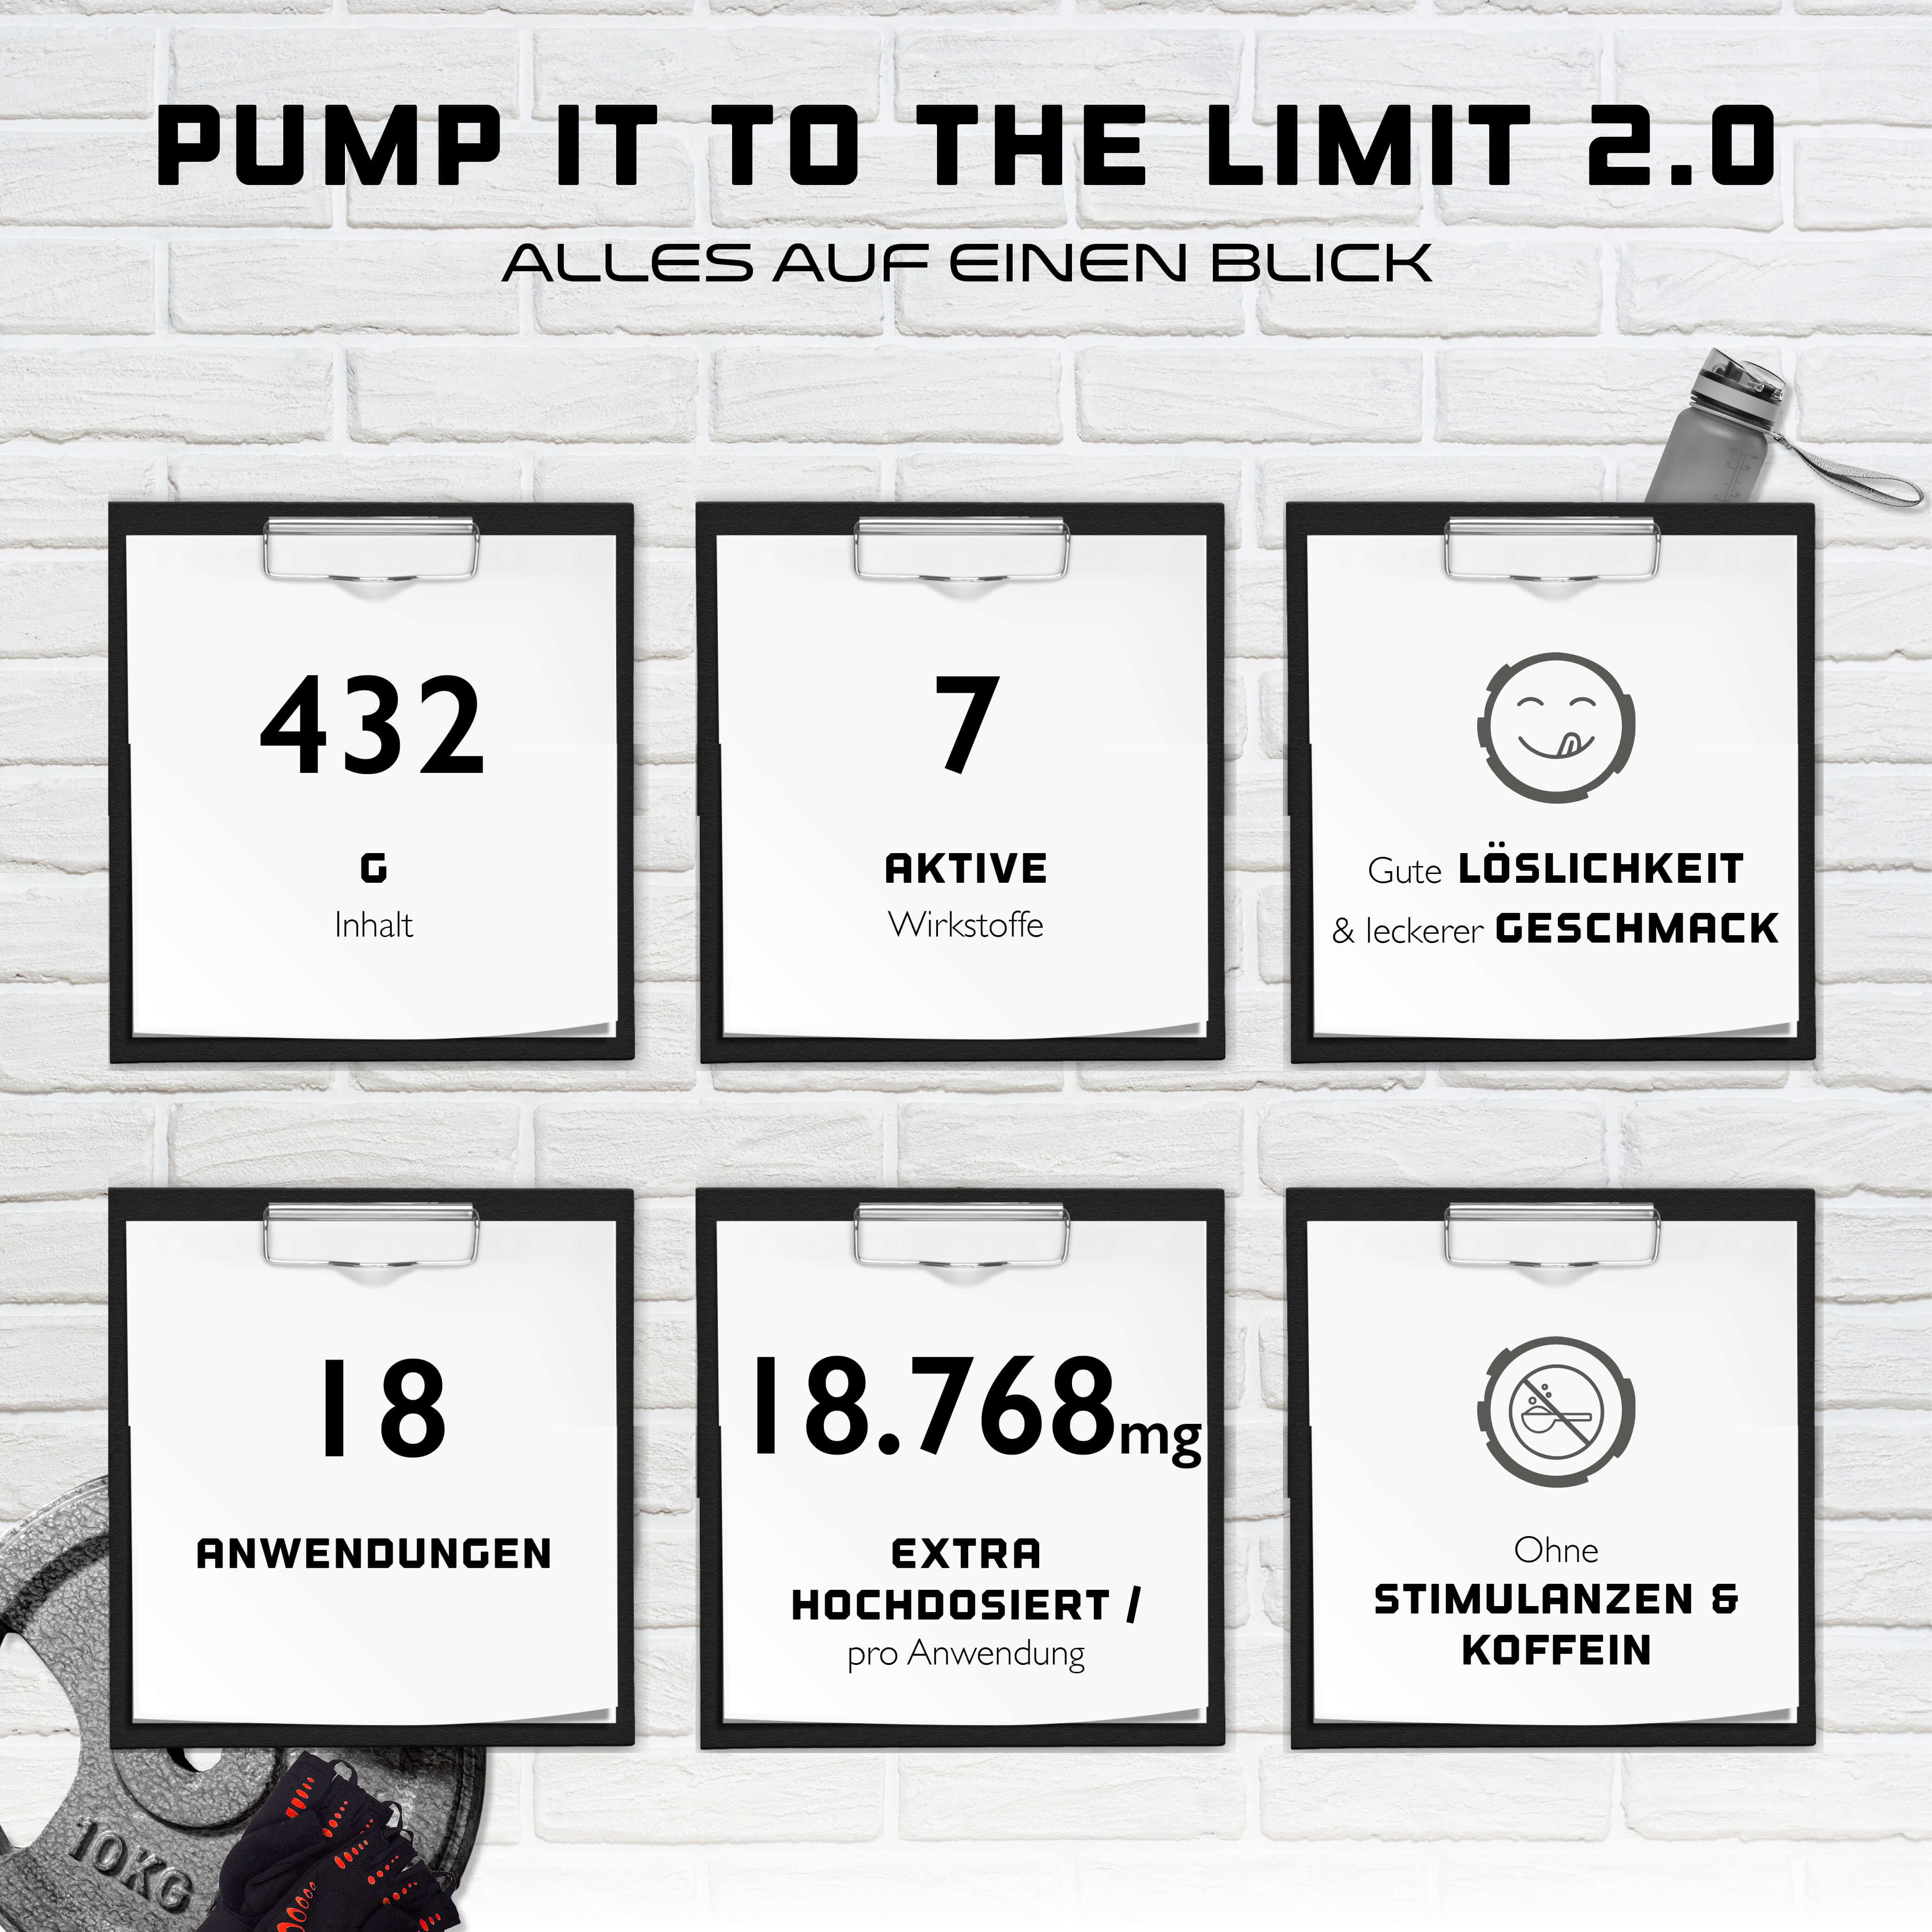 GEN Pump it to the Limit 2.0 - Pre Workout & Trainings Booster